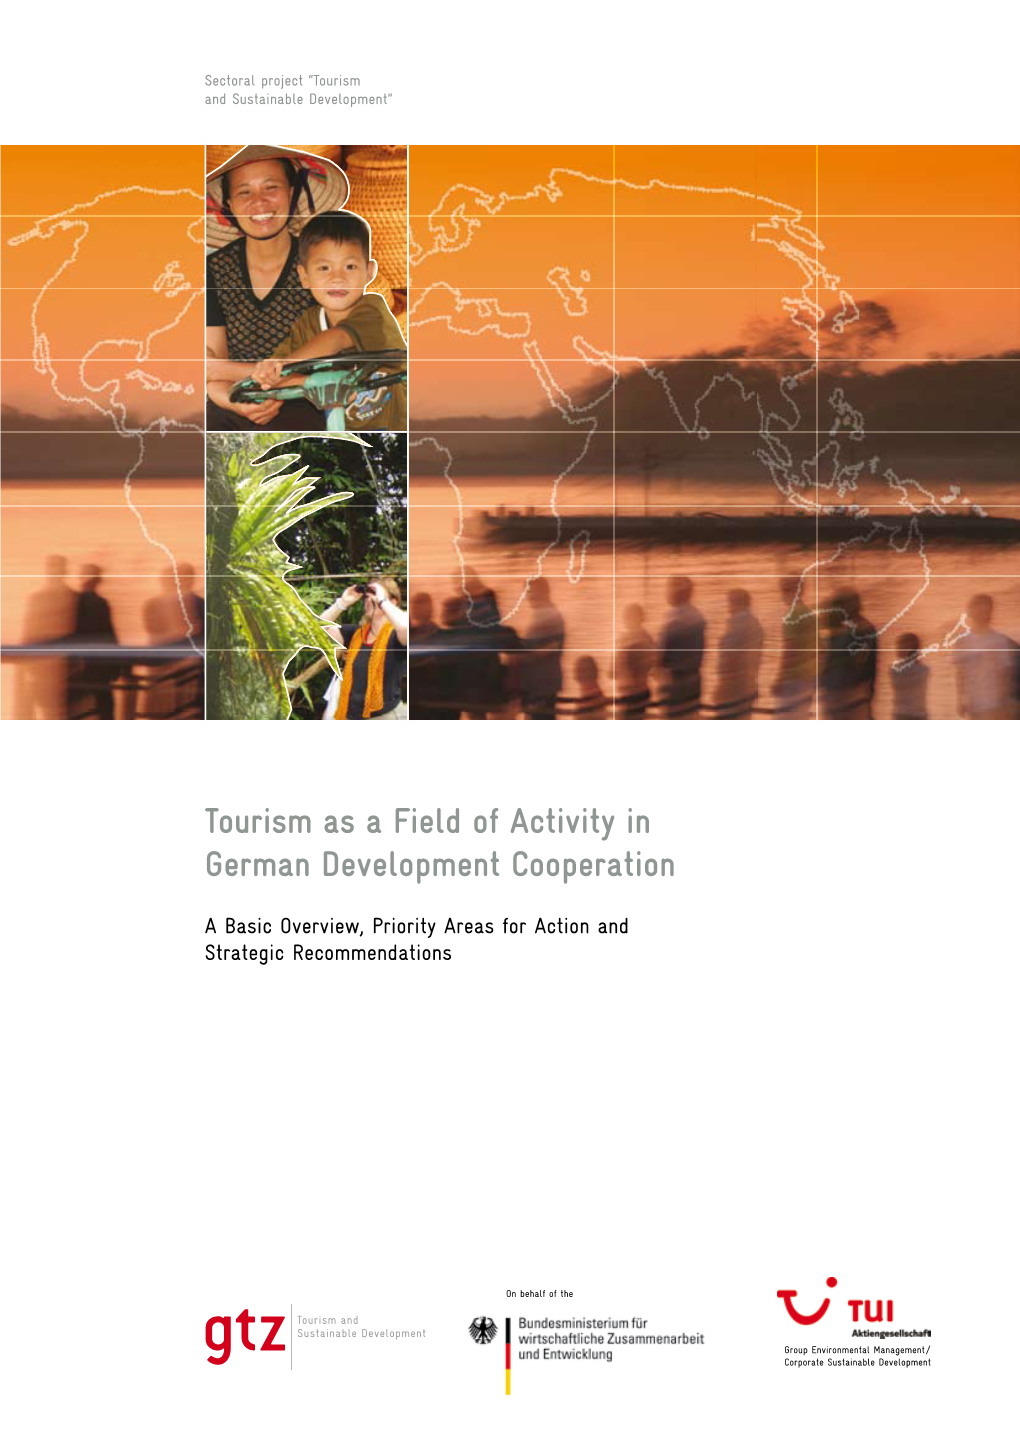 Tourism As a Field of Activity in German Development Cooperation